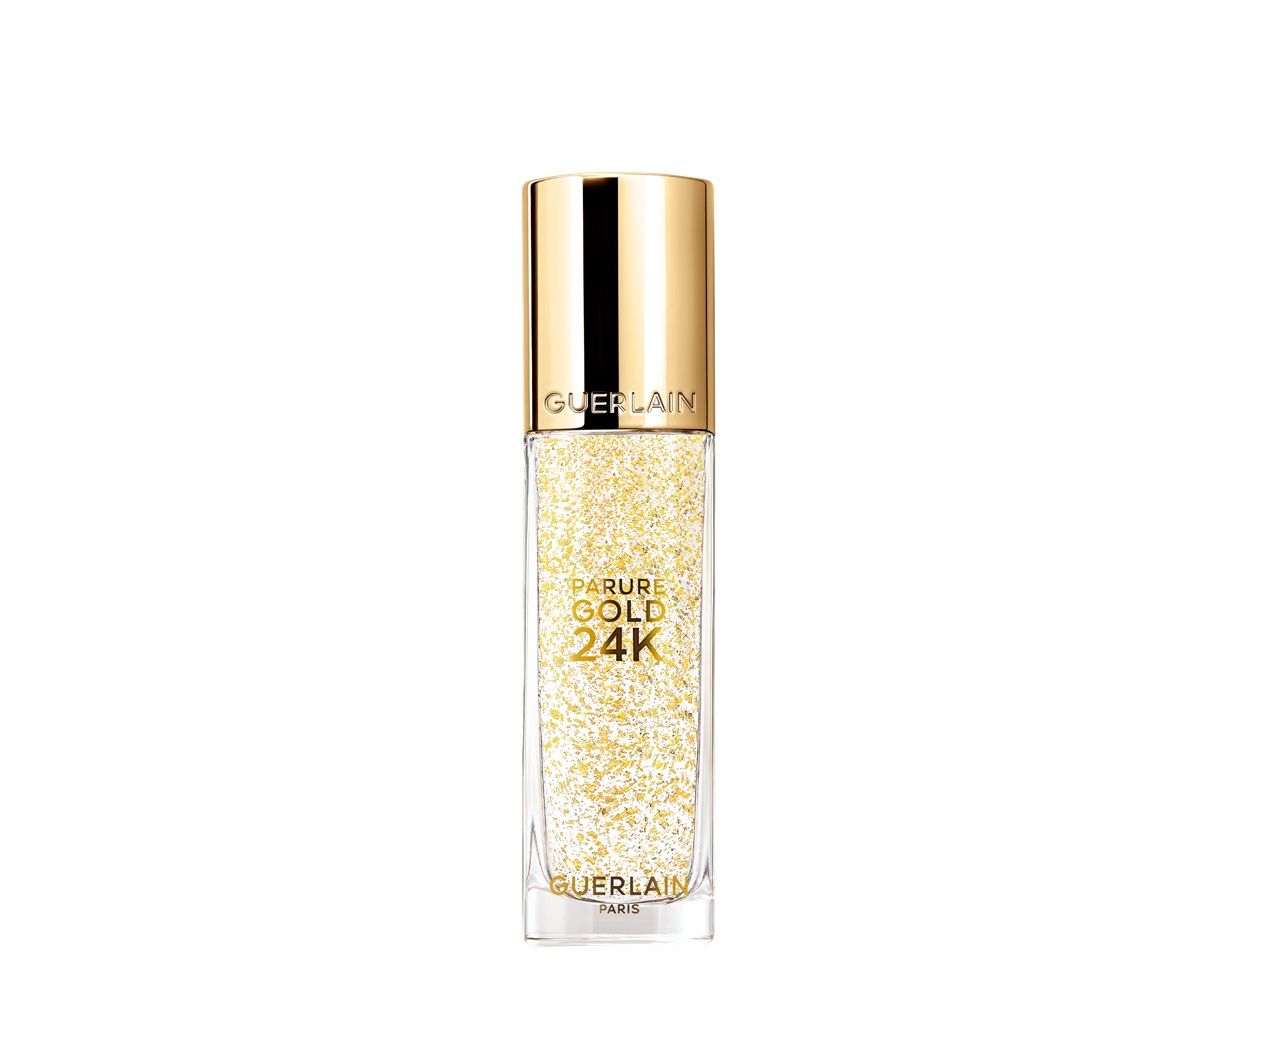 New Parure Gold 24K Radiance Booster Perfection Primer 35ml